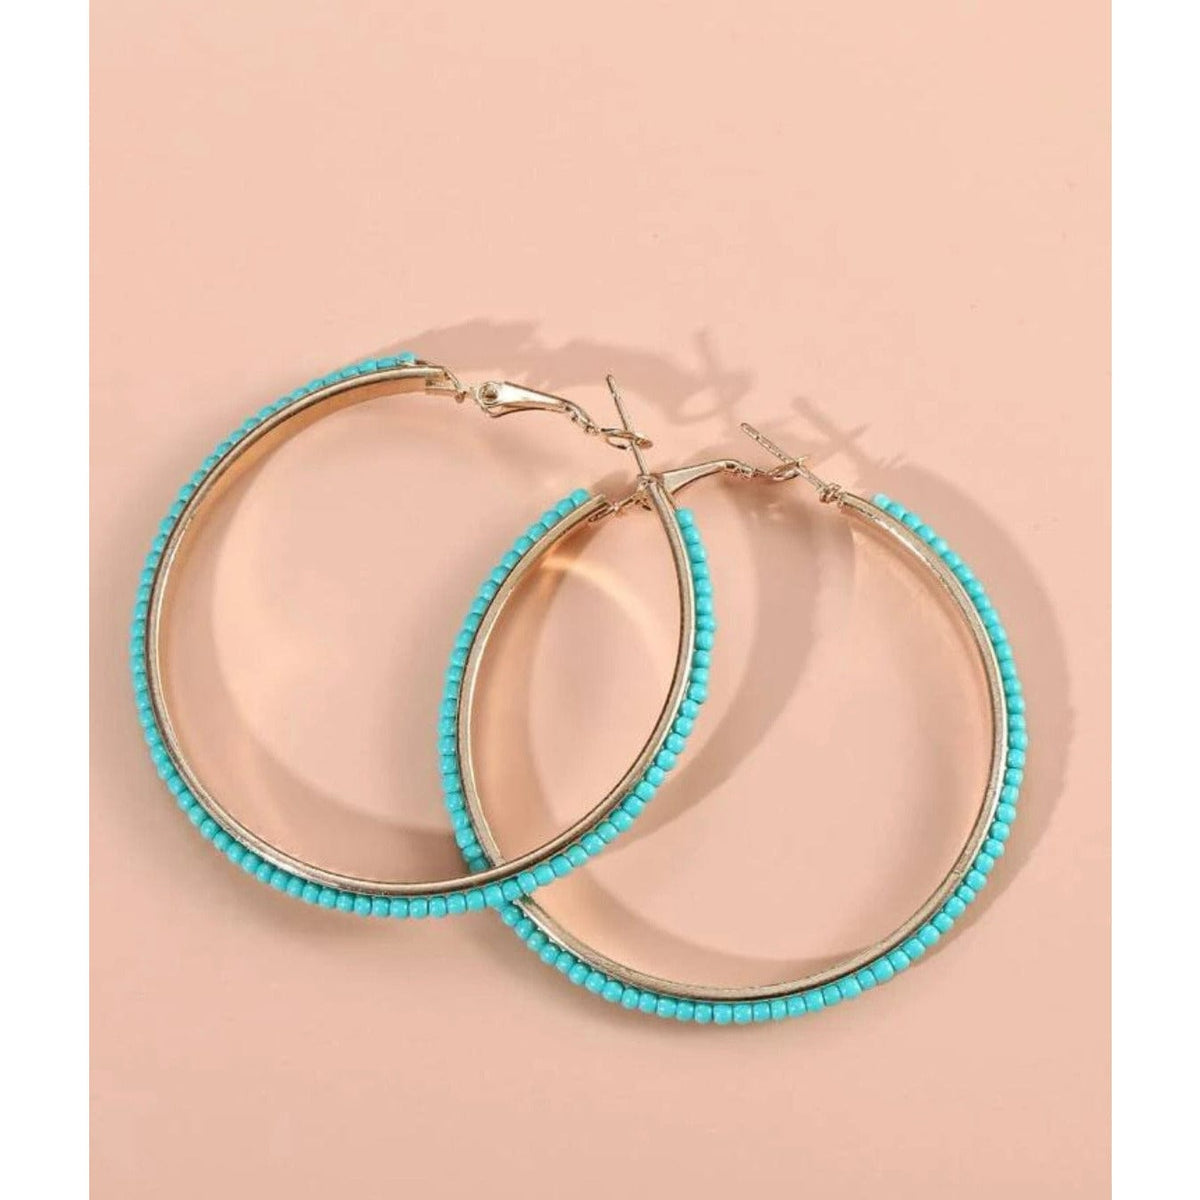 Turquoise beaded hoops TheFringeCultureCollective